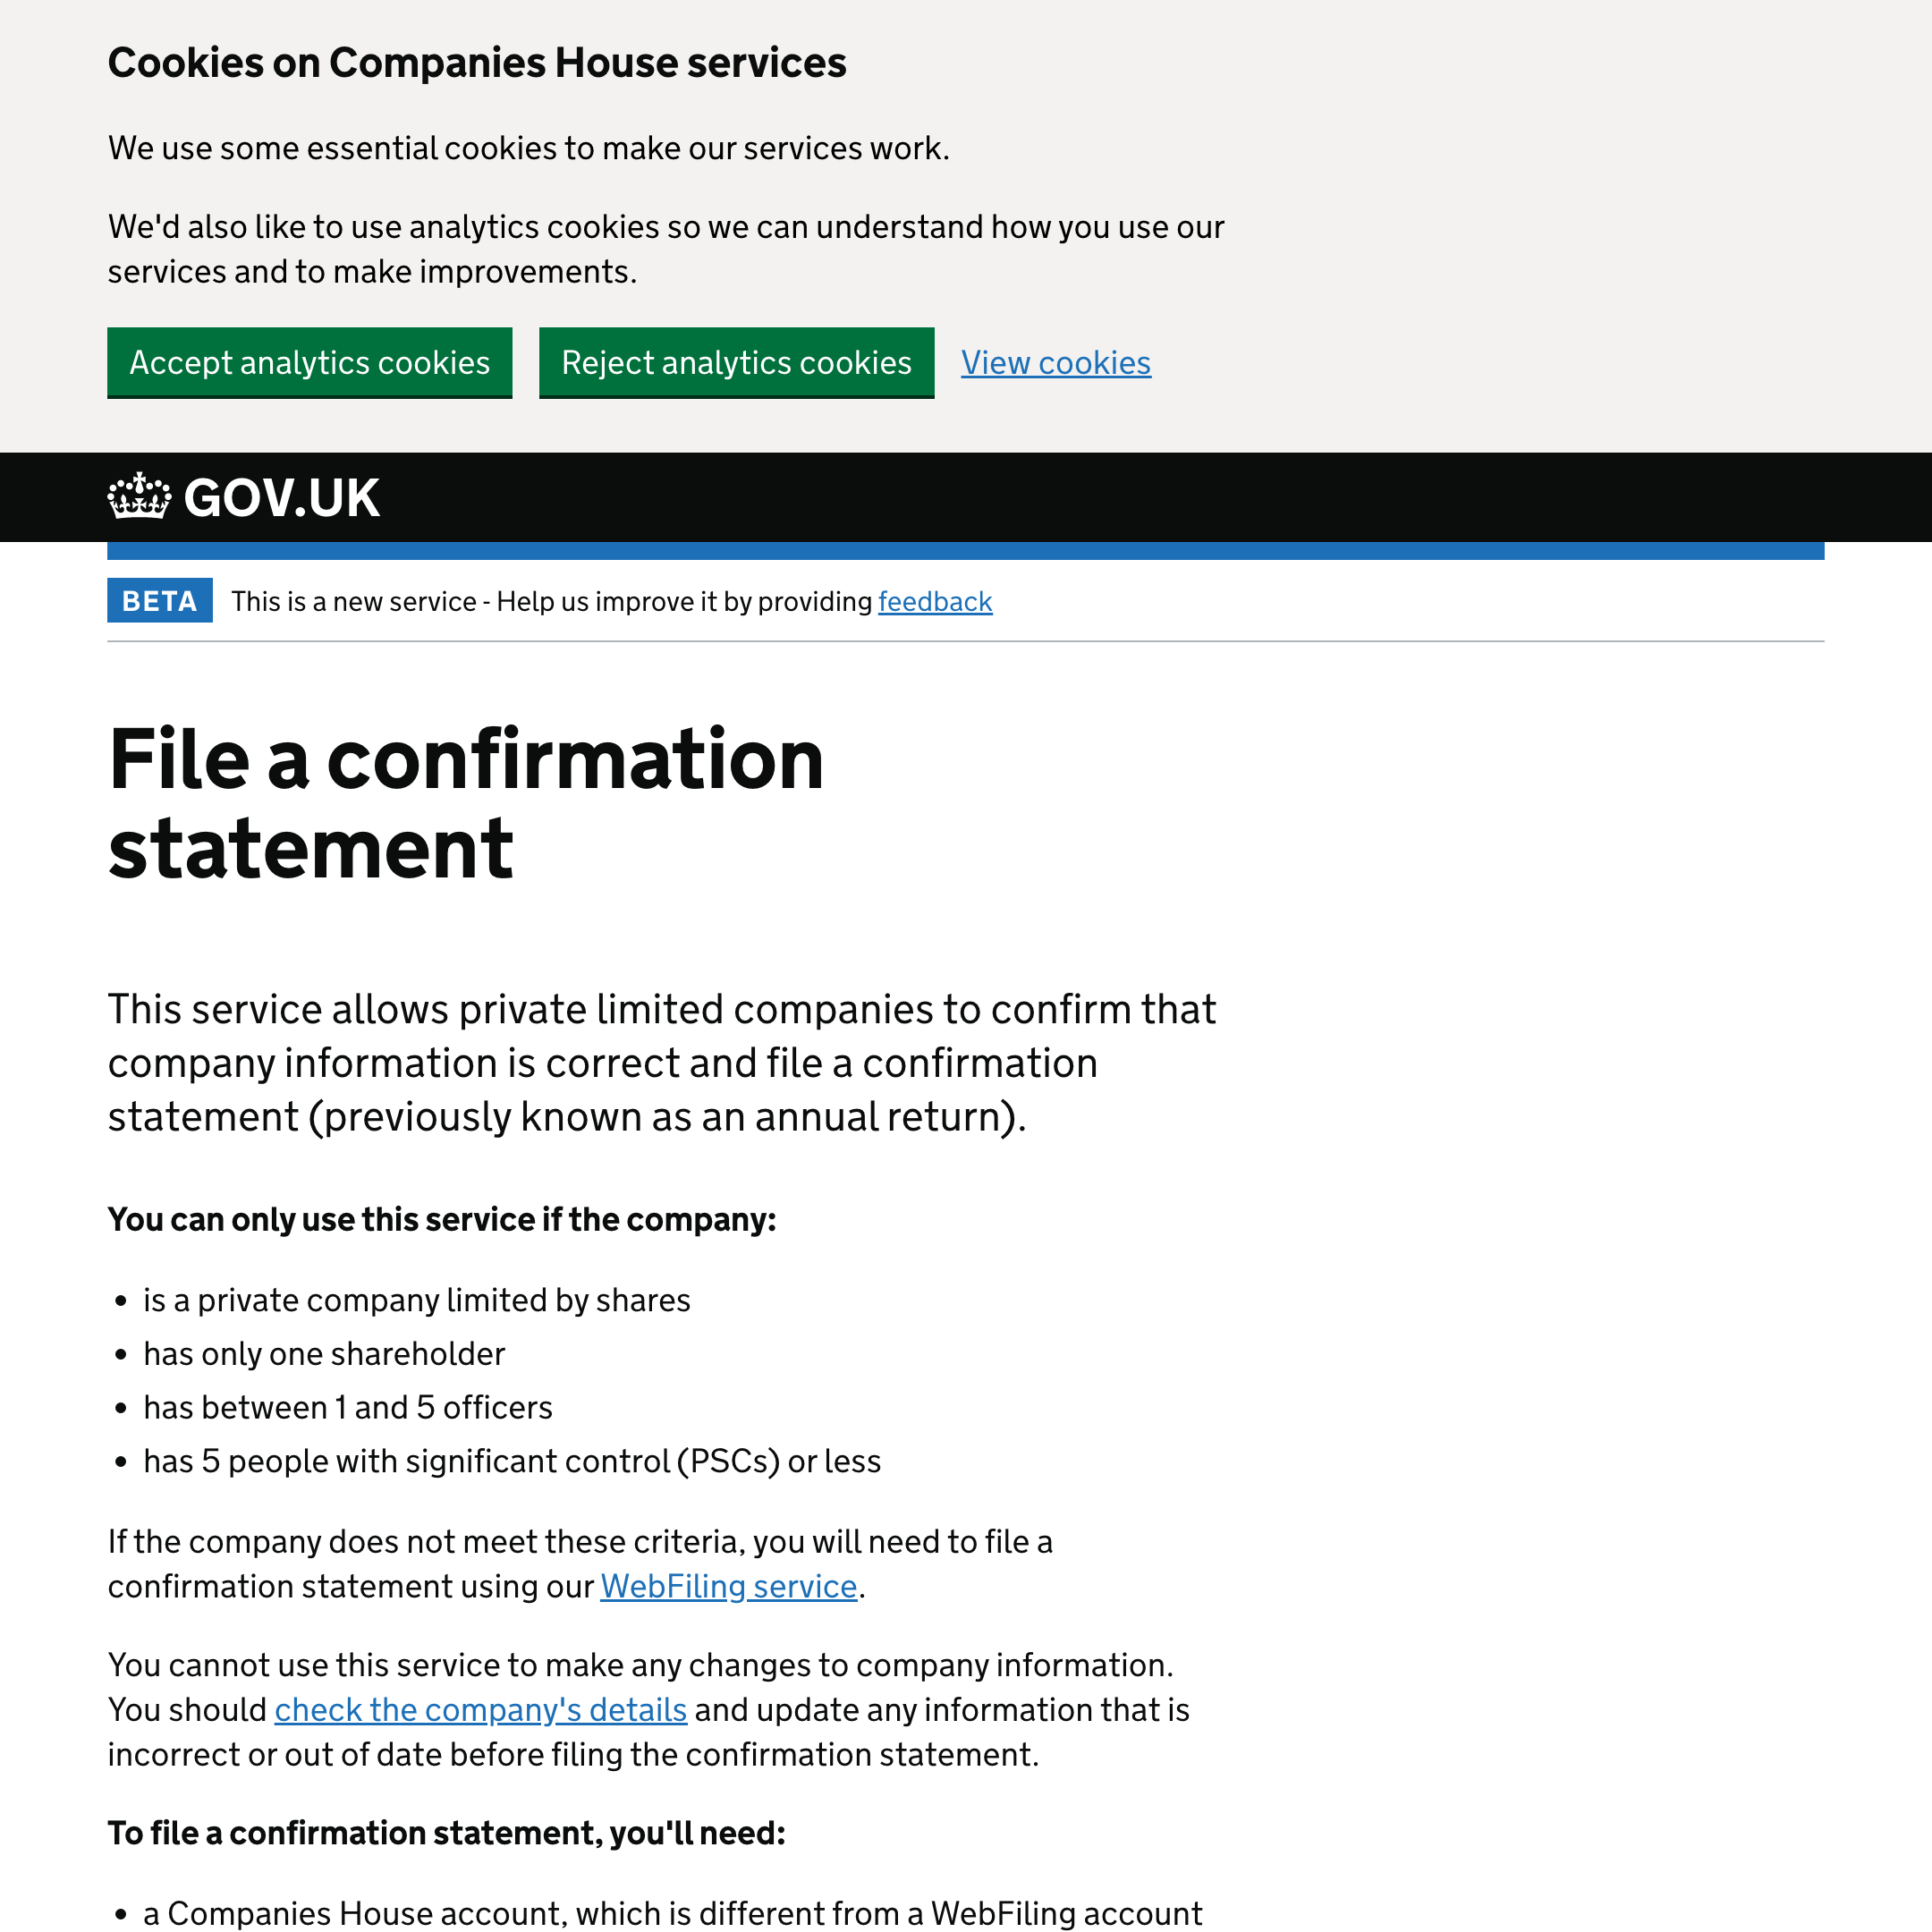 File a confirmation statement